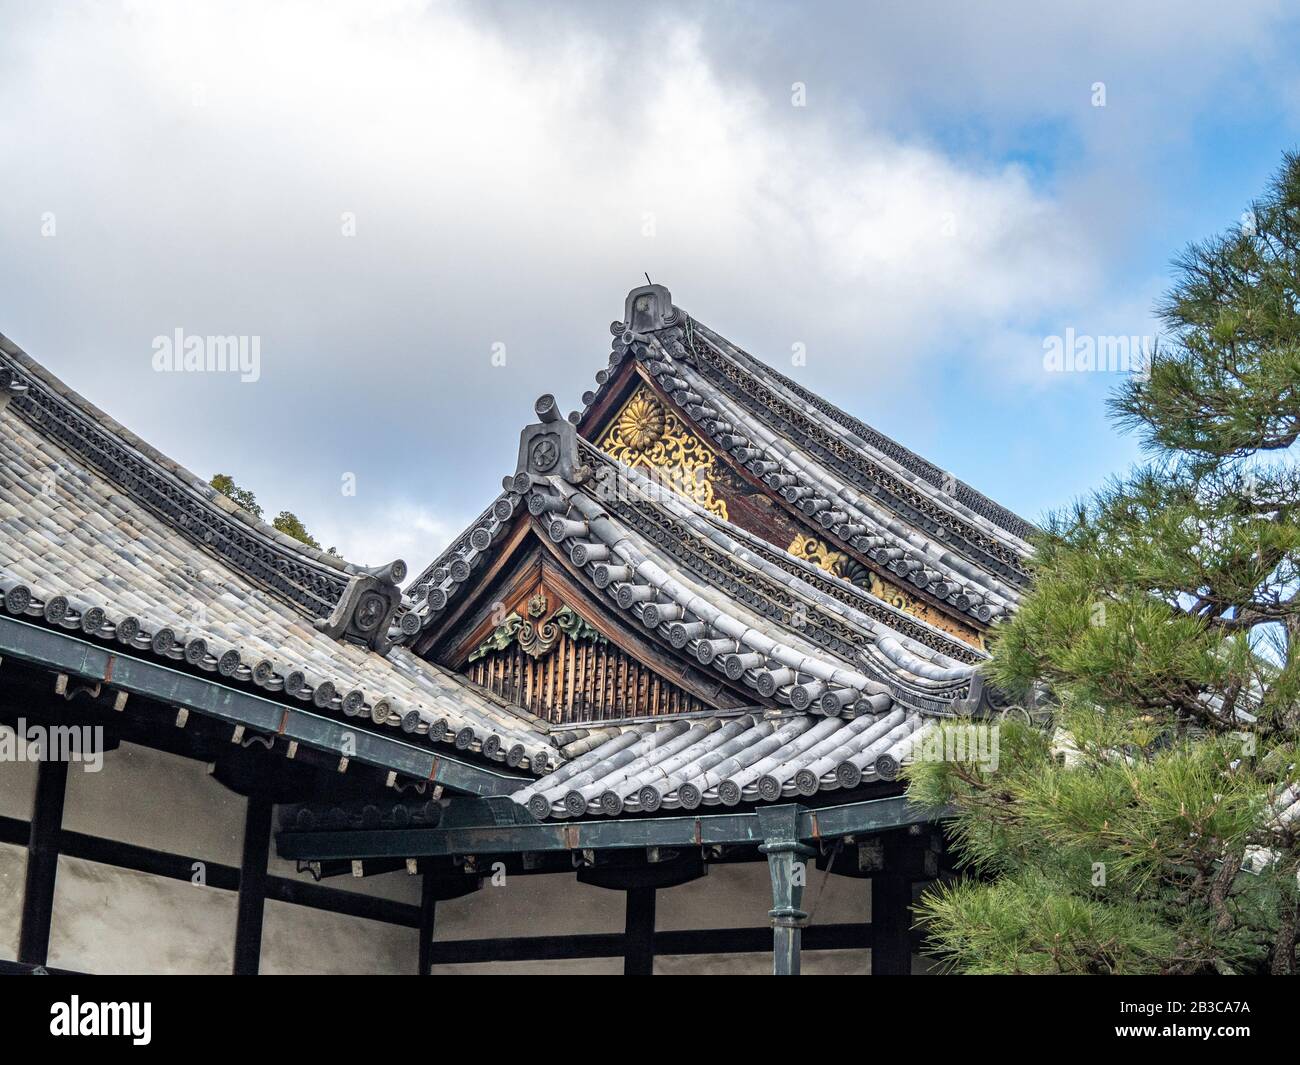 : Traditional Japanese peaked roofs with Imperial Chrysanthemum symbols, blue sky, white clouds, and copy space. Stock Photo